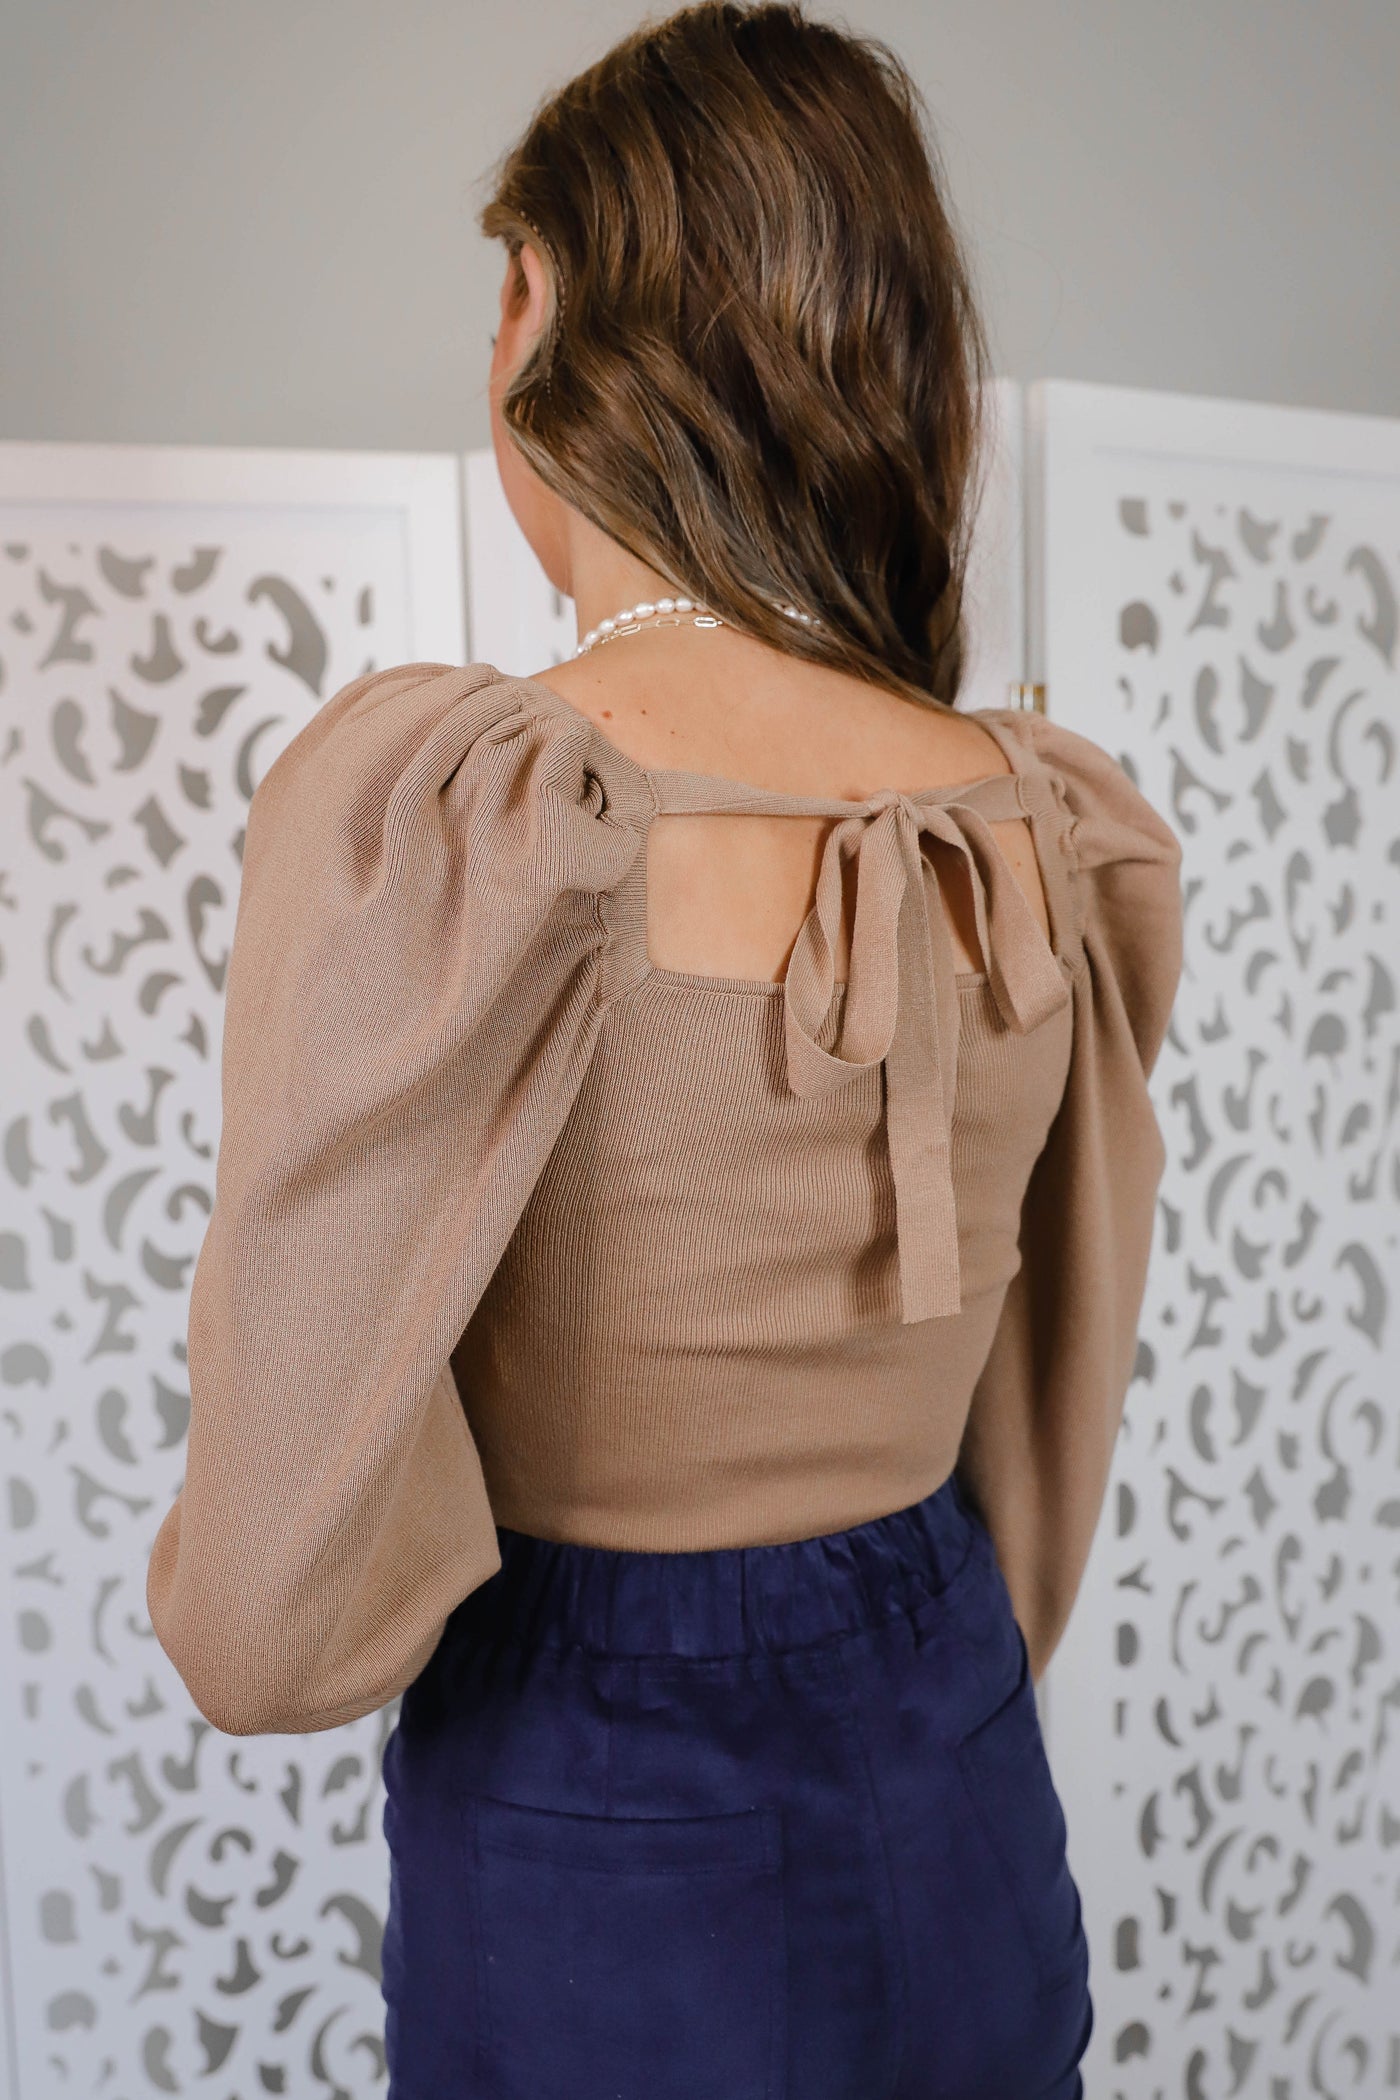 Women's Cropped Sweater Top- Tan Cropped Sweater- Mittoshop Sweater